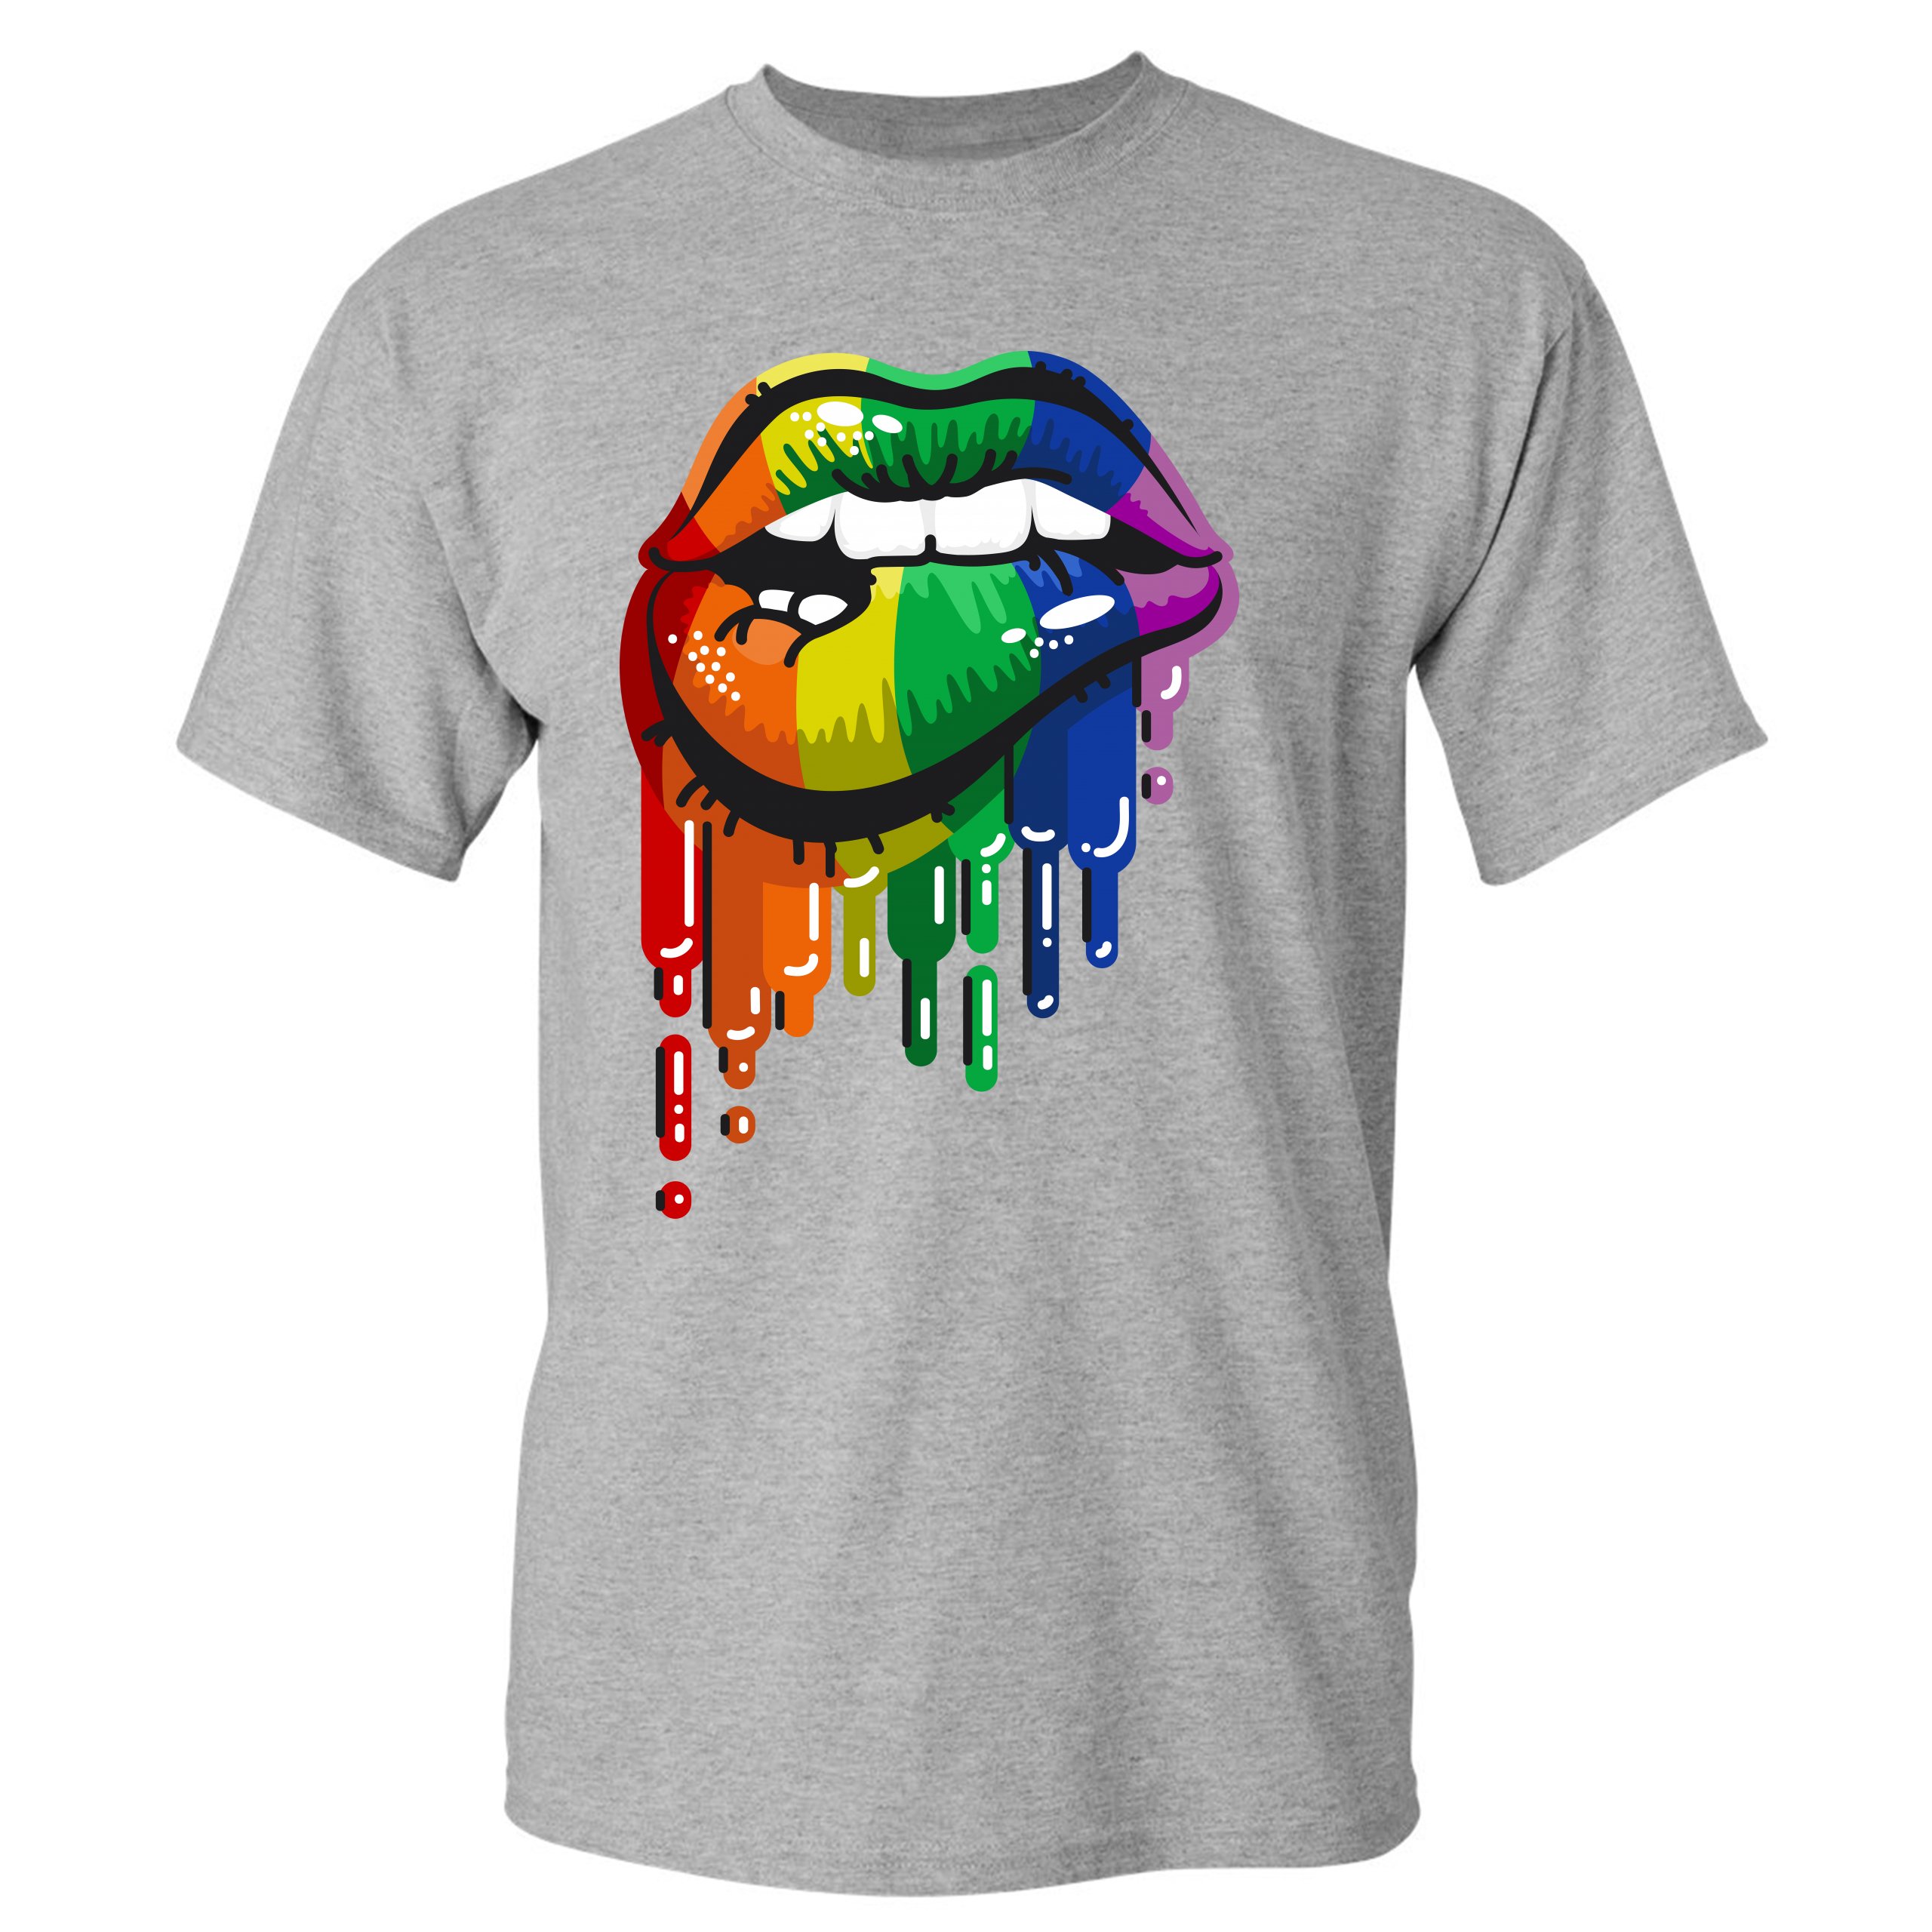 Sexy Melting Rainbow Lips T Shirt Lgbt Queer Gay Pride Love Wins Mens